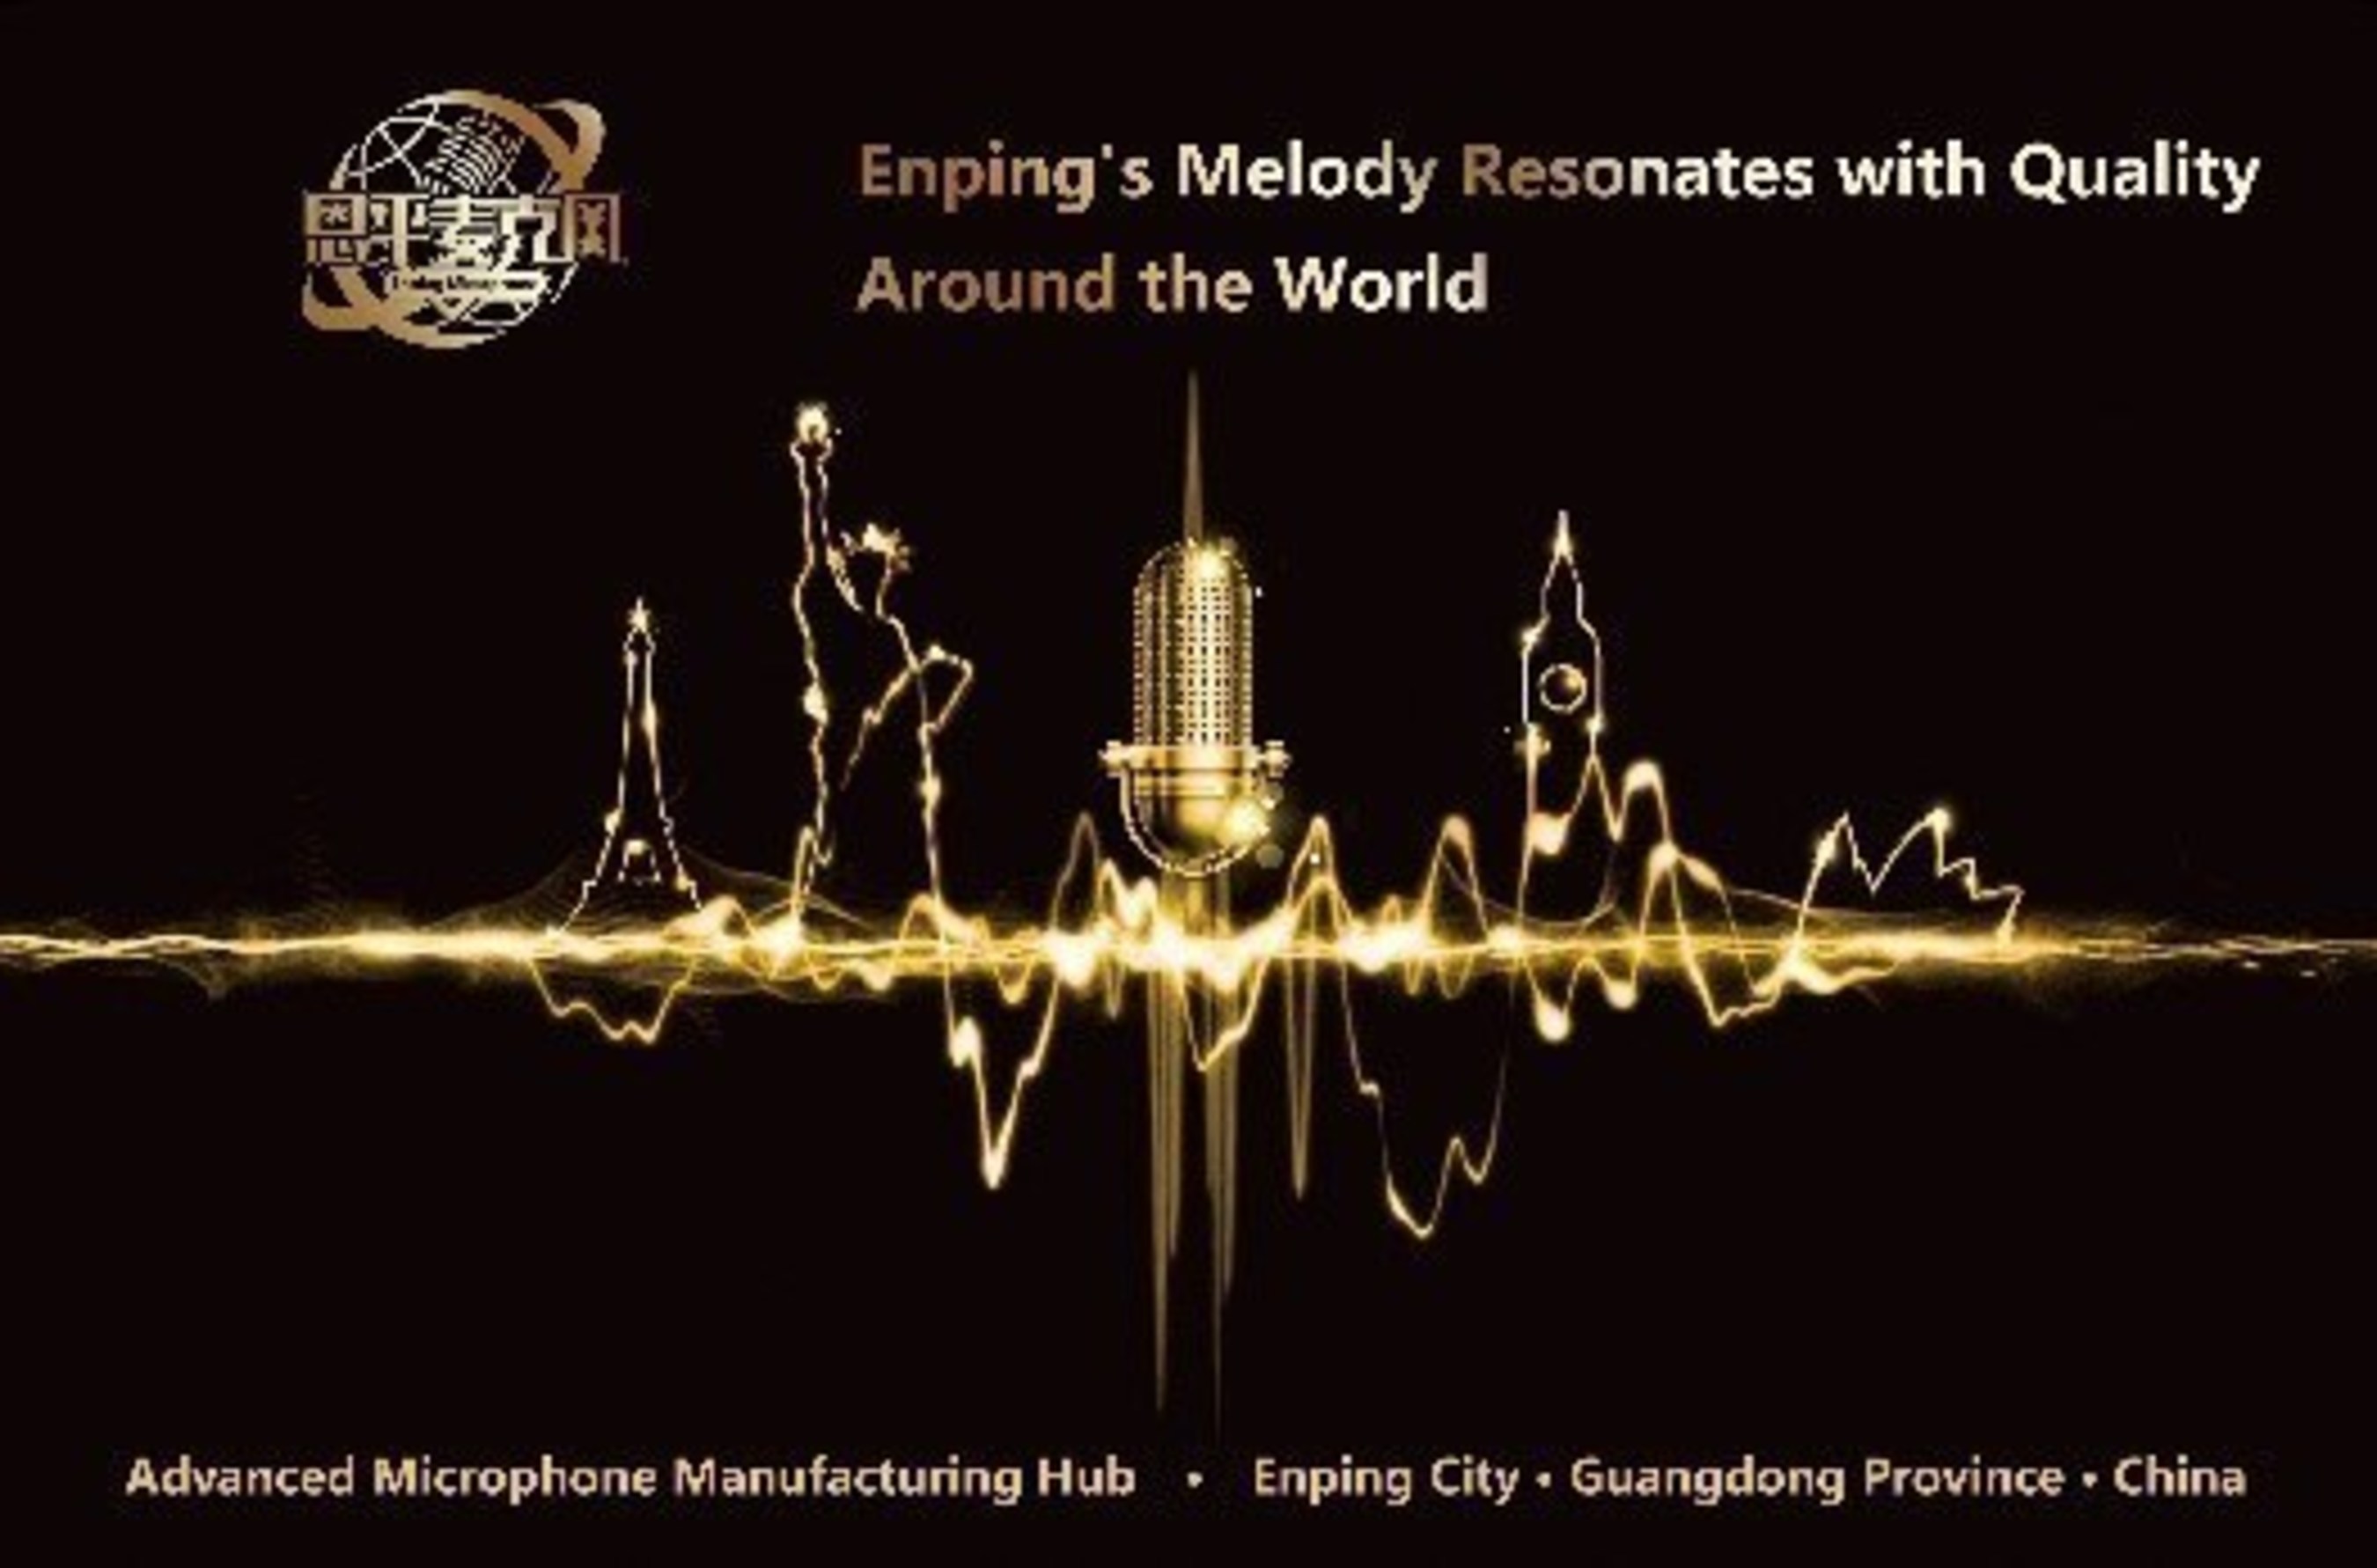 Enping's melody resonates with quality around the world